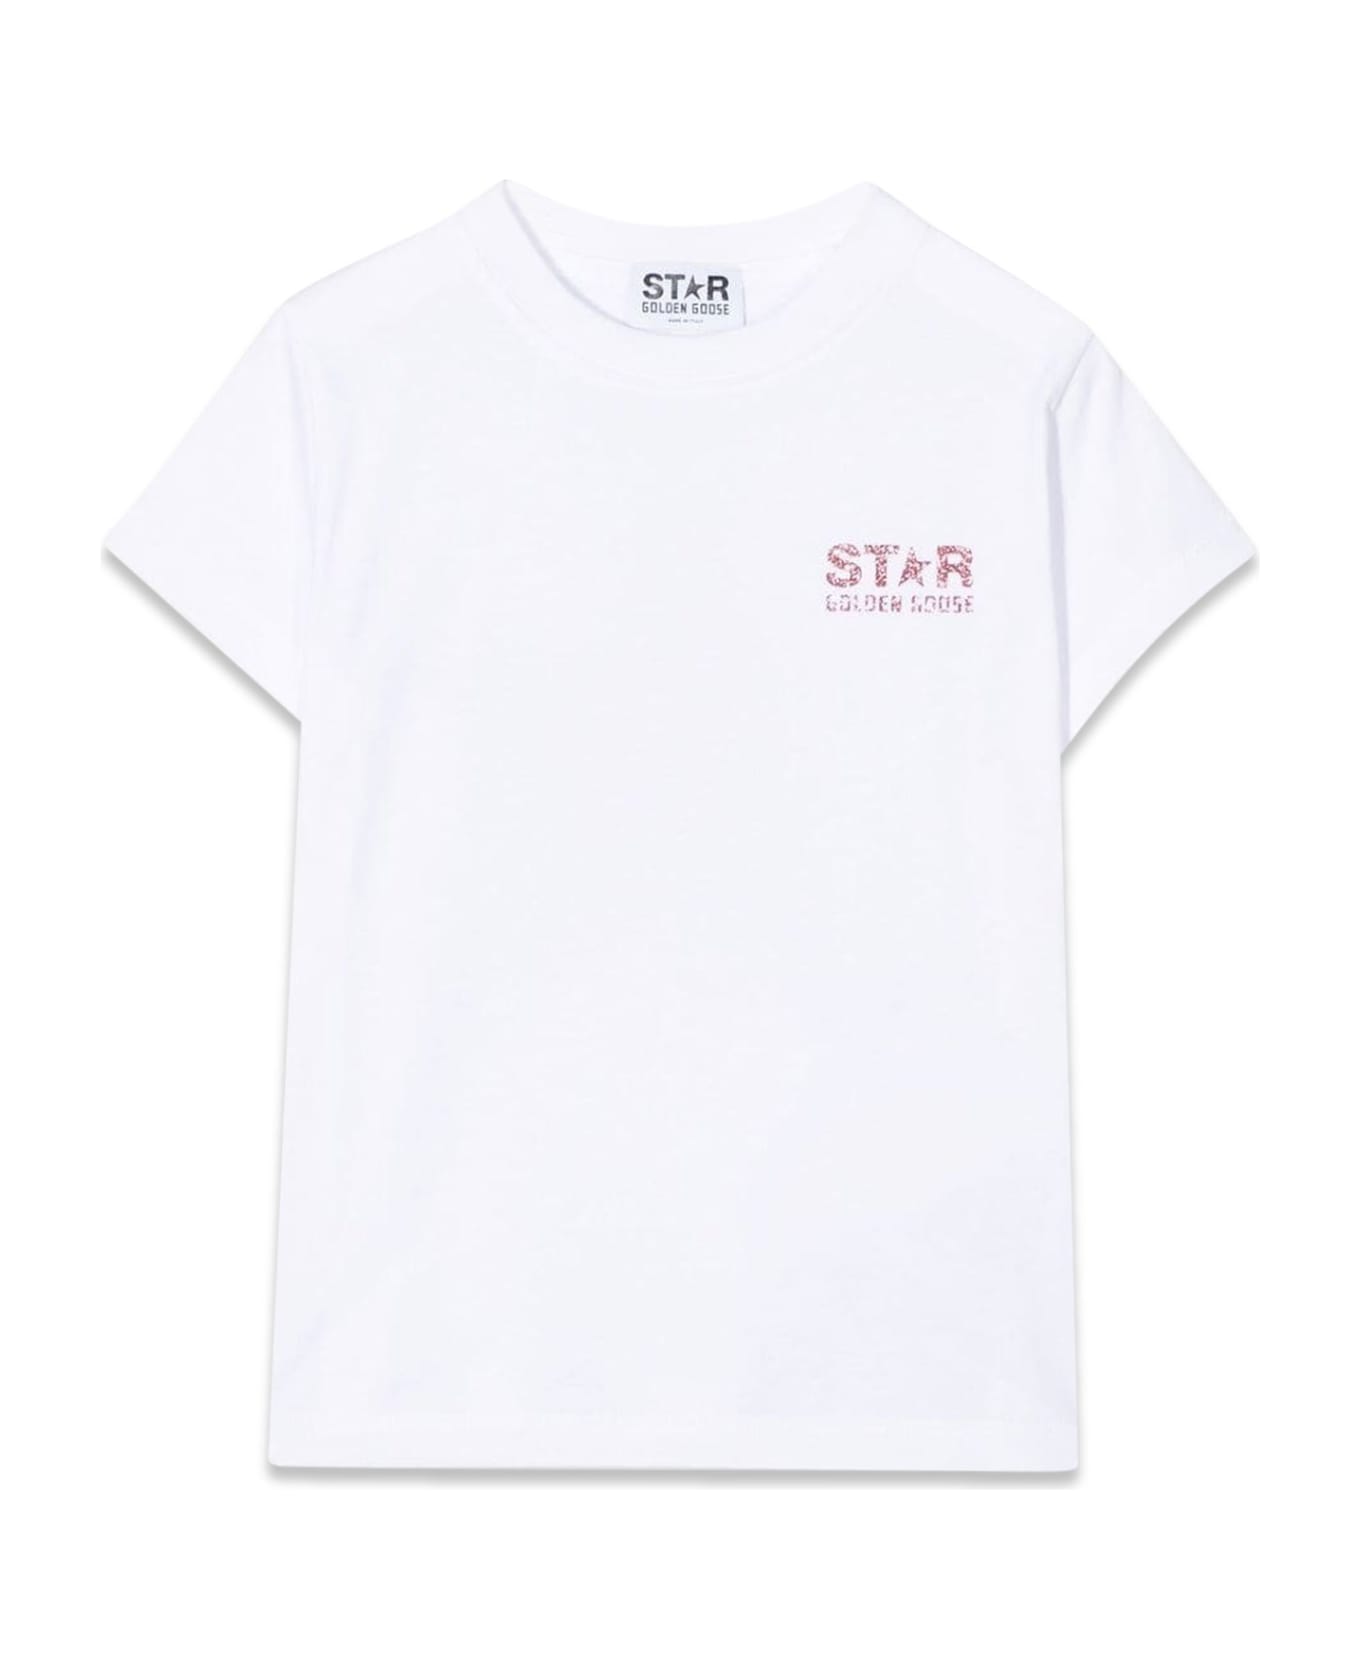 Golden Goose Star men polo-shirts clothing footwear-accessories - BIANCO